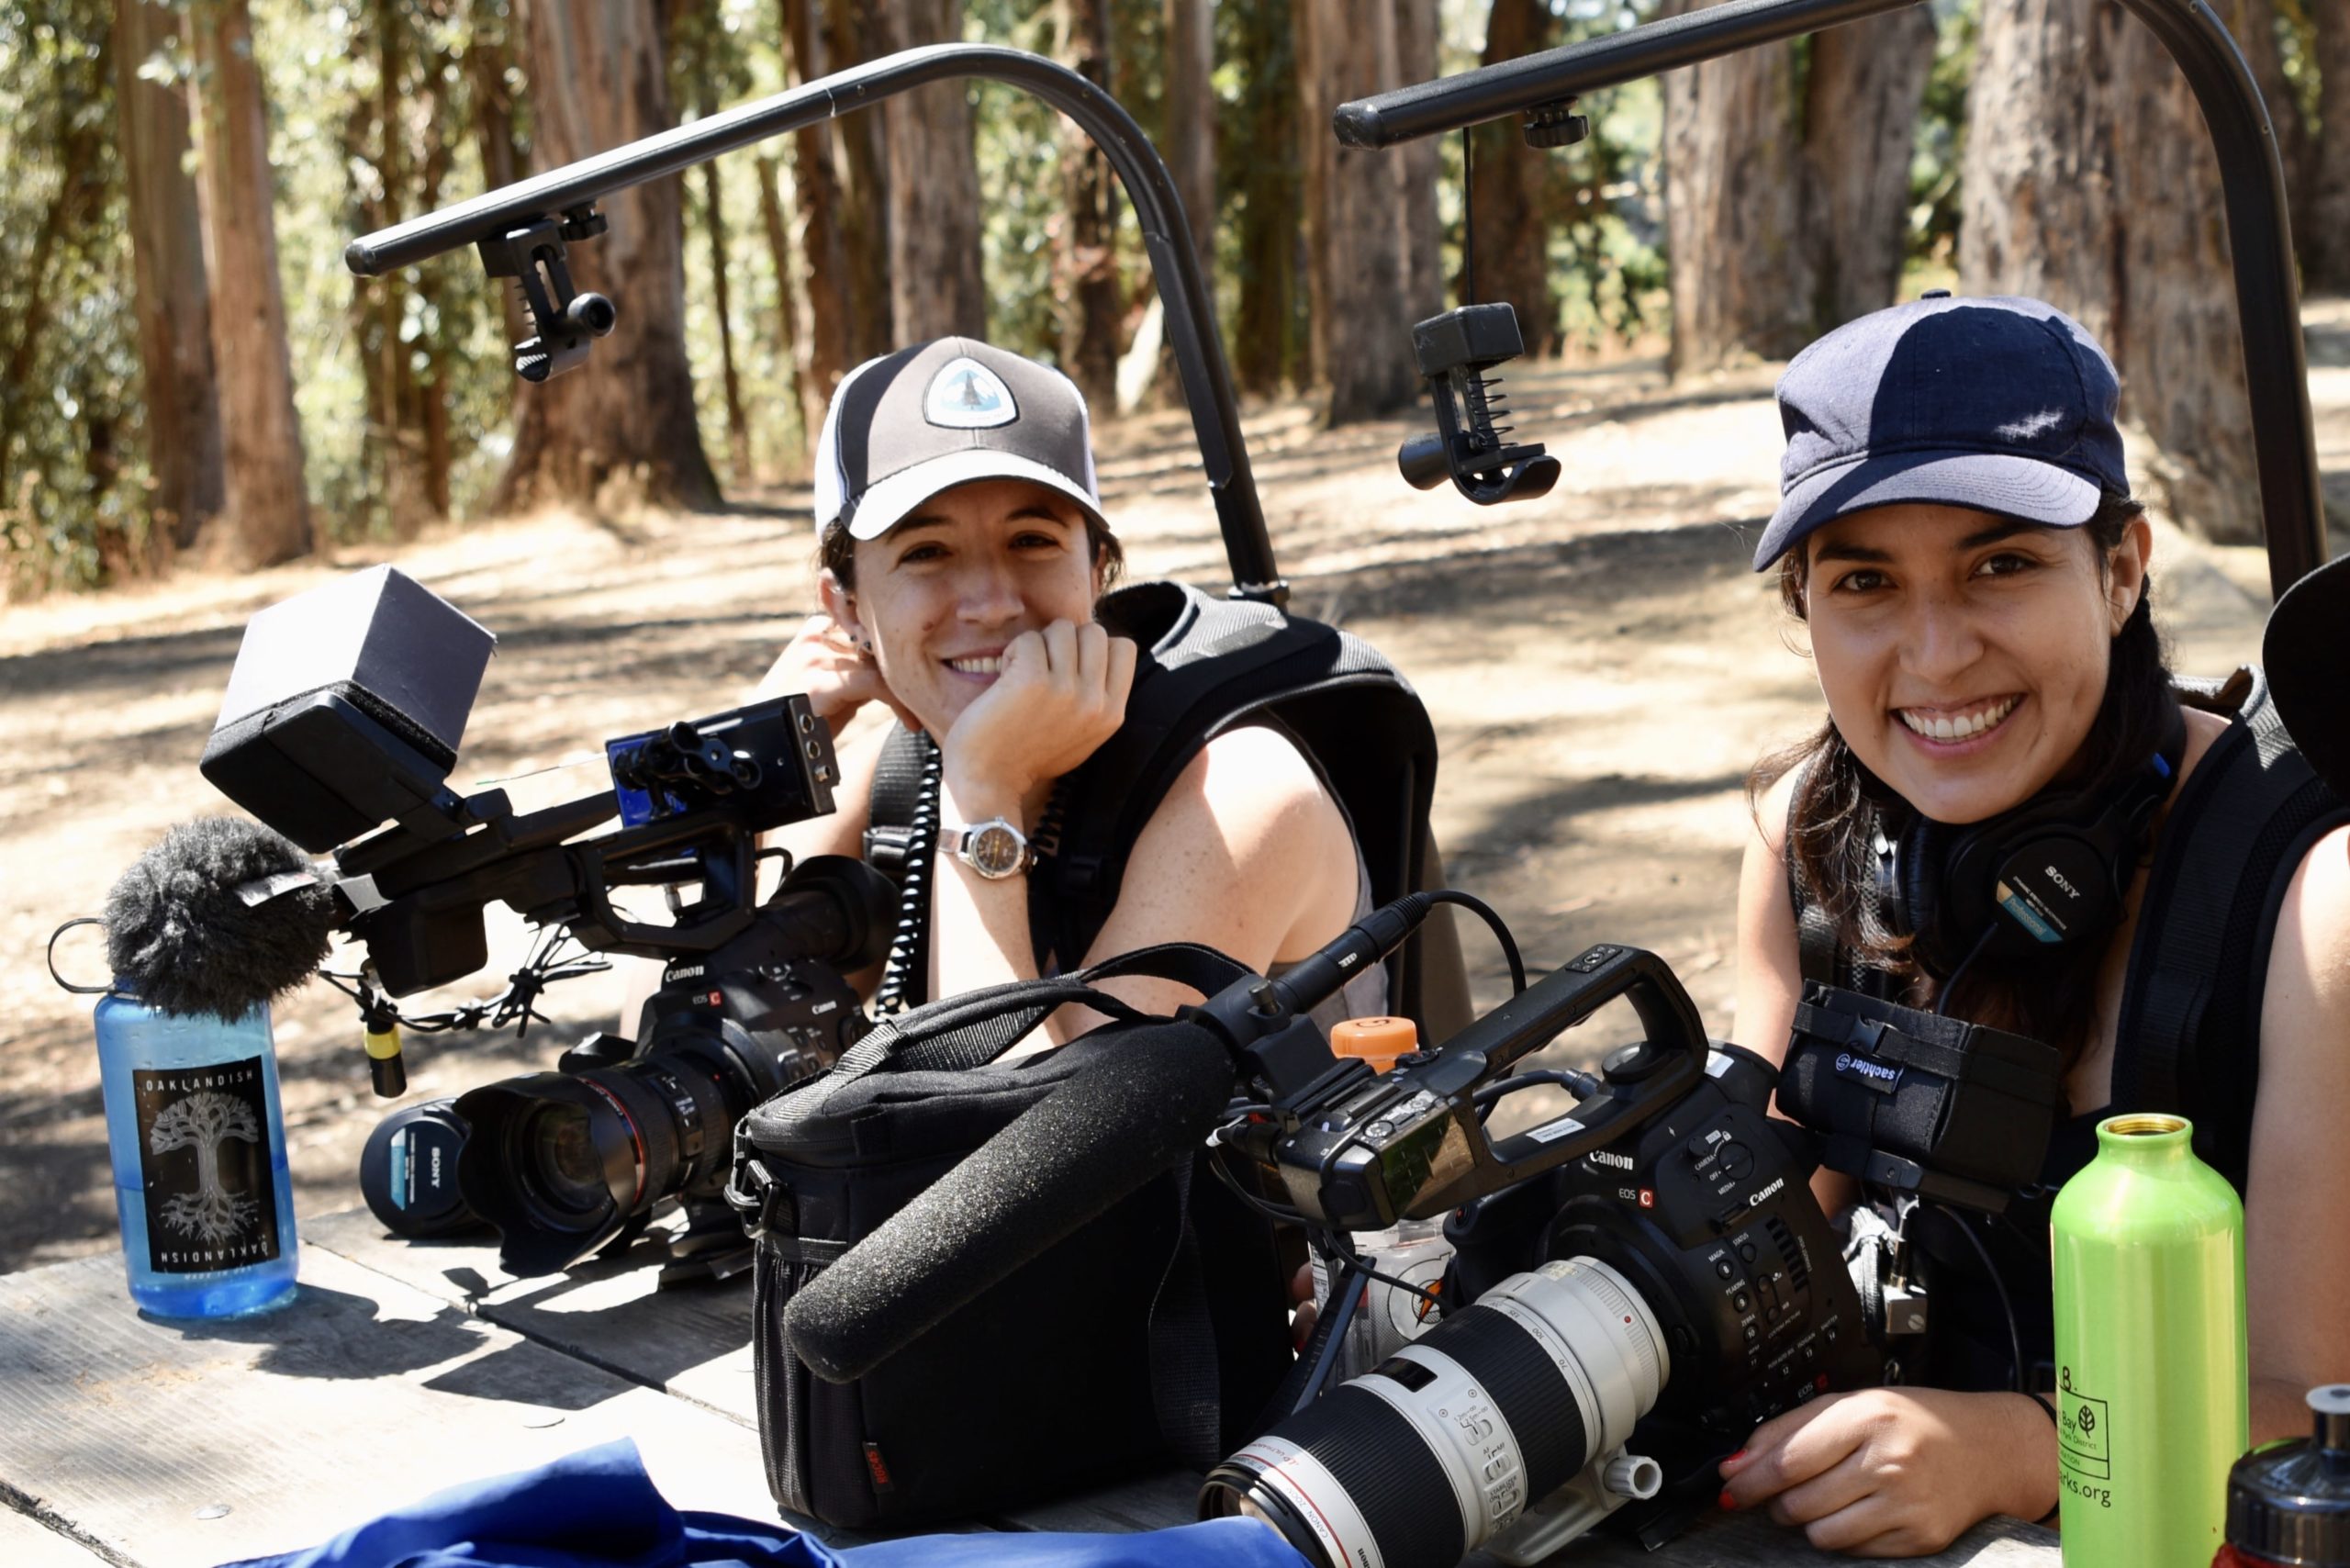 Two smiling individuals wearing hats are seated outdoors with professional camera equipment. Various photography gear, water bottles, and trees in the background can be seen, indicating an outdoor shoot or nature documentation setting. One person holds a camera with a large lens, embodying the Berkeley Journalism spirit.